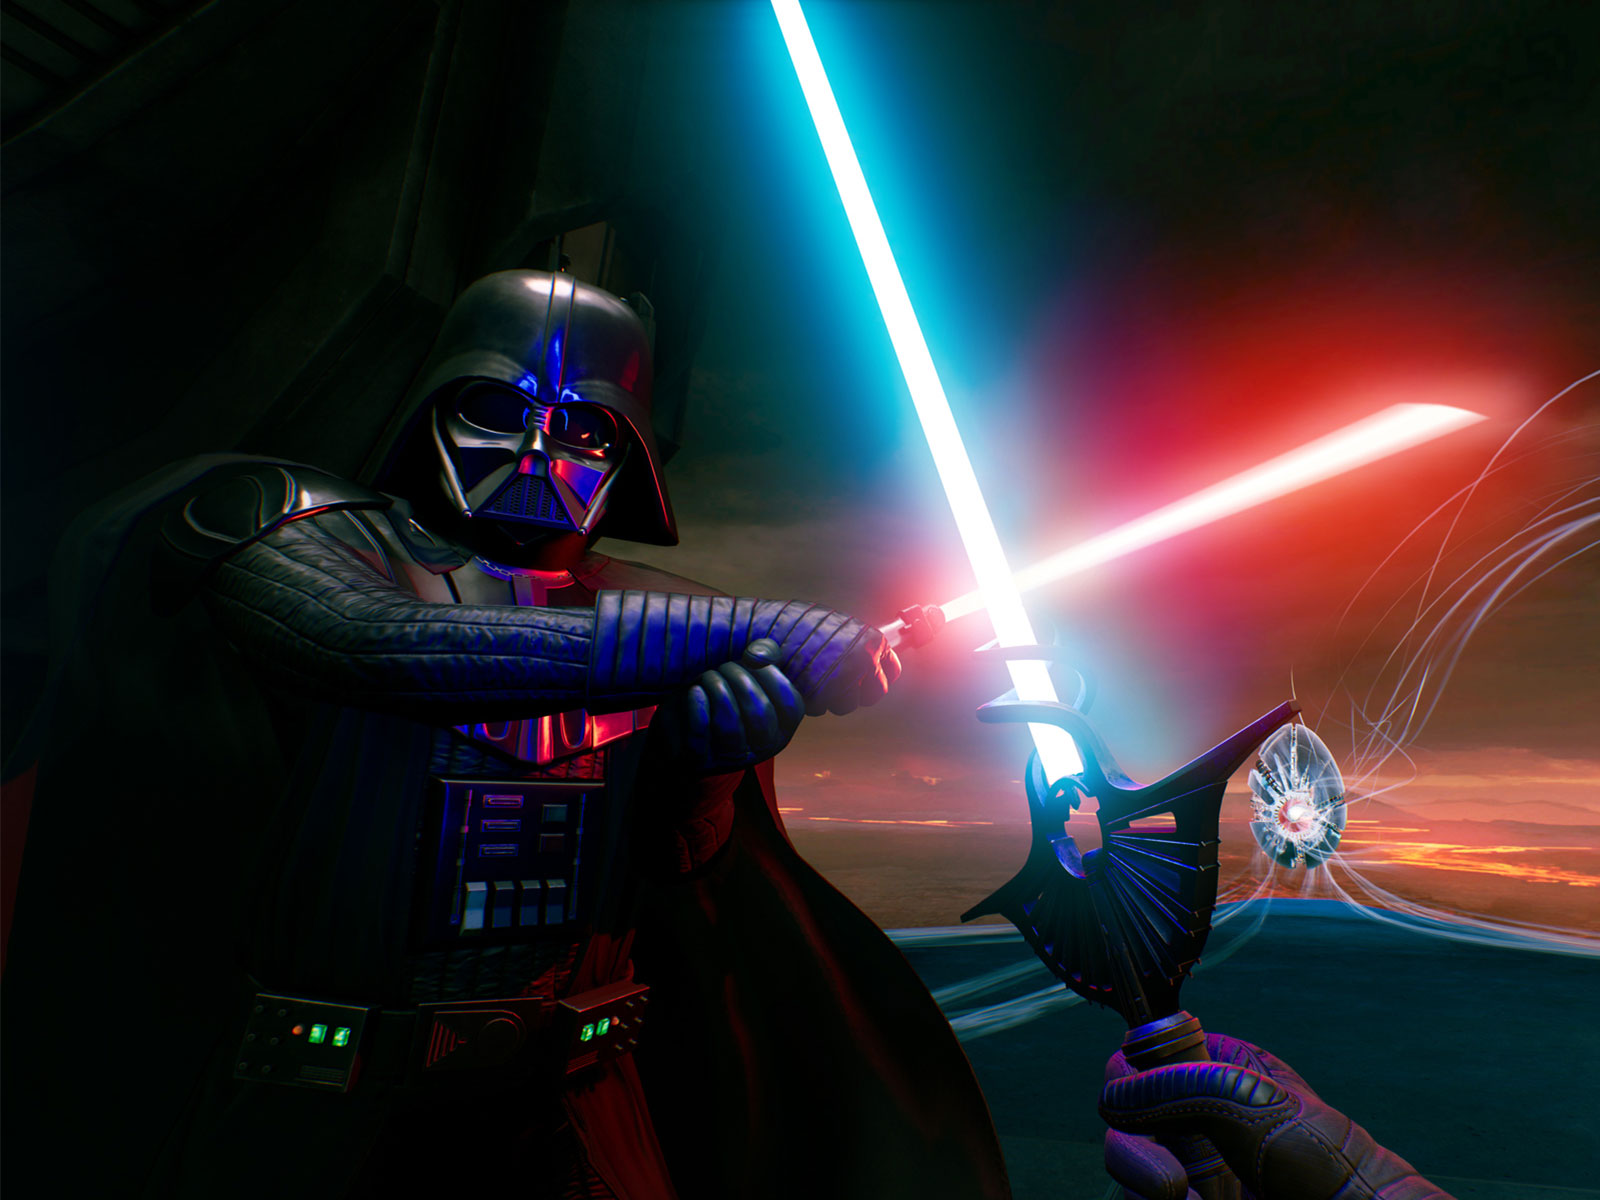 Darth Vader and the VR player clash lightsabers in a screenshot from Episode III of Star Wars: Vader Immortal.